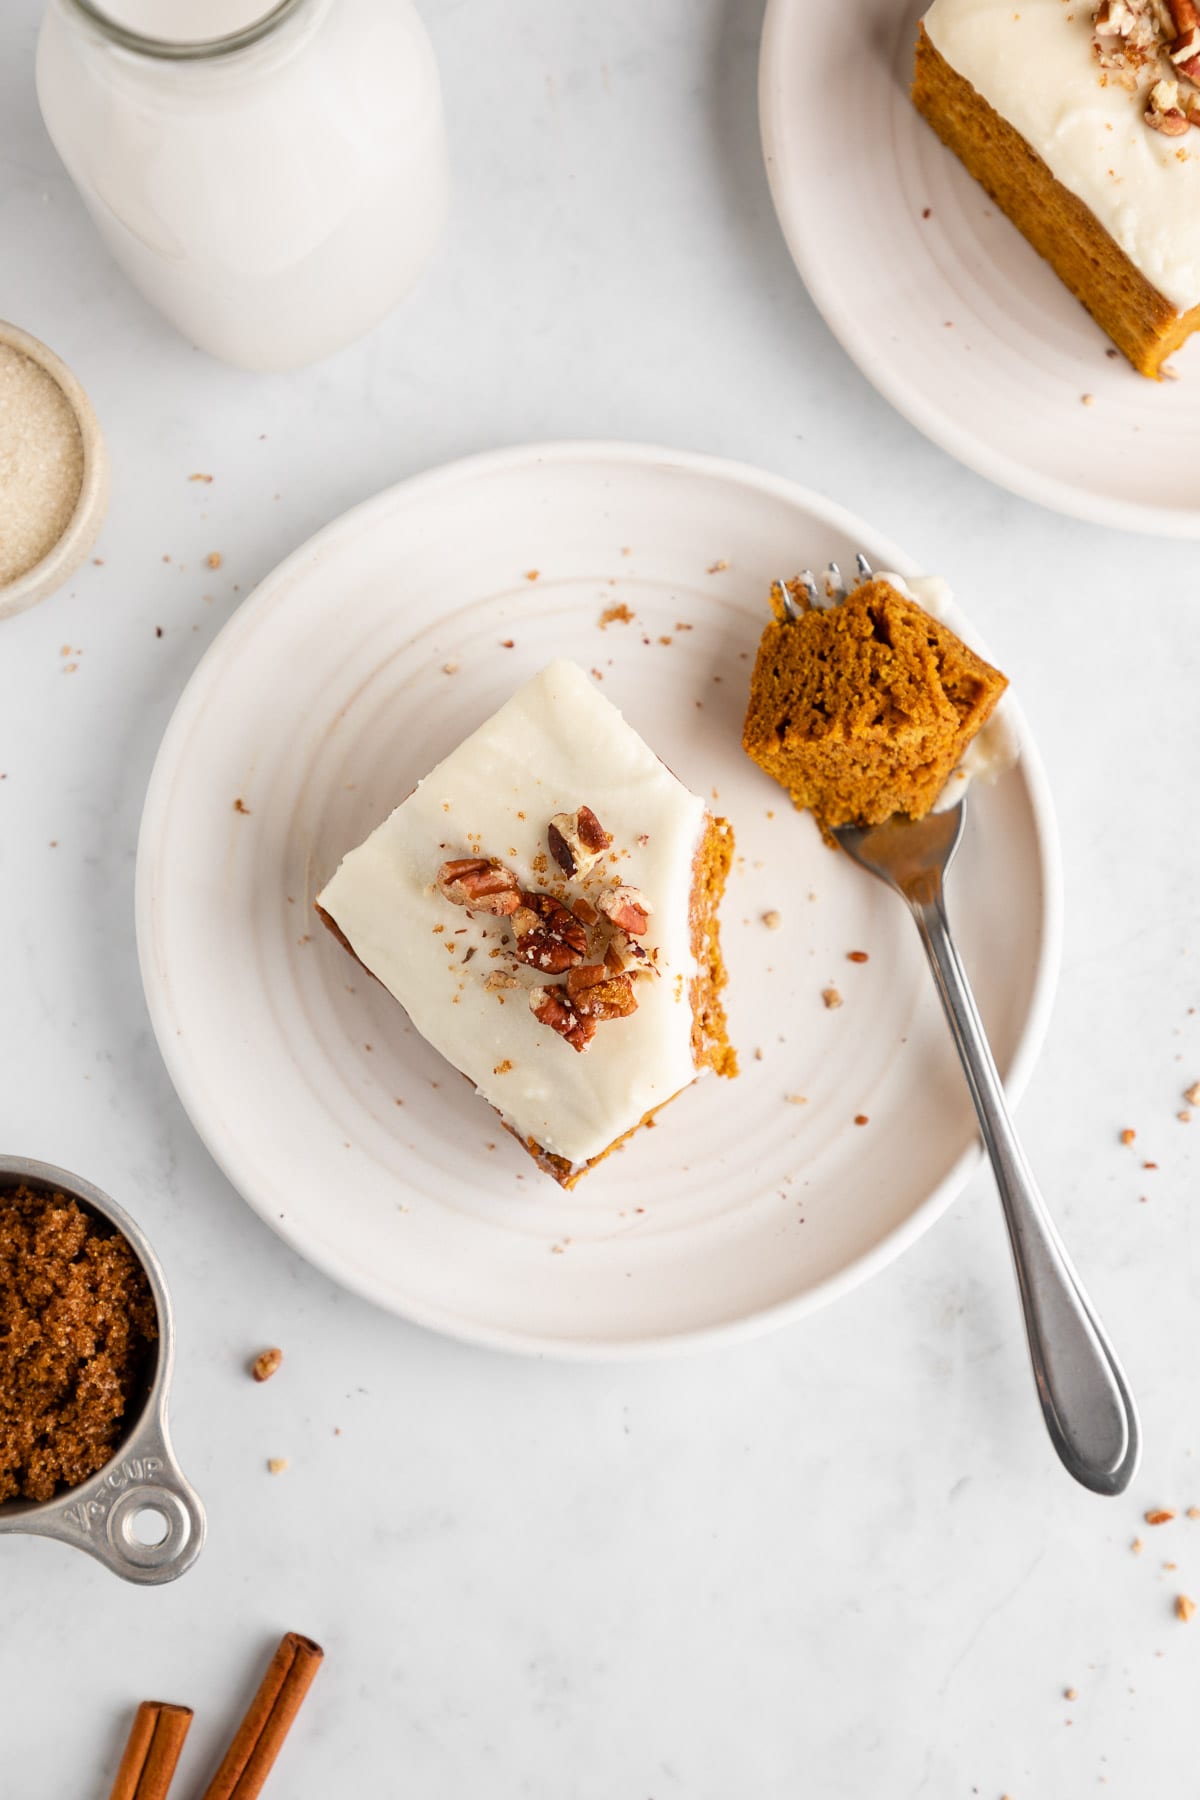 a fork sliced into a piece of vegan pumpkin cake with dairy-free cream cheese frosting